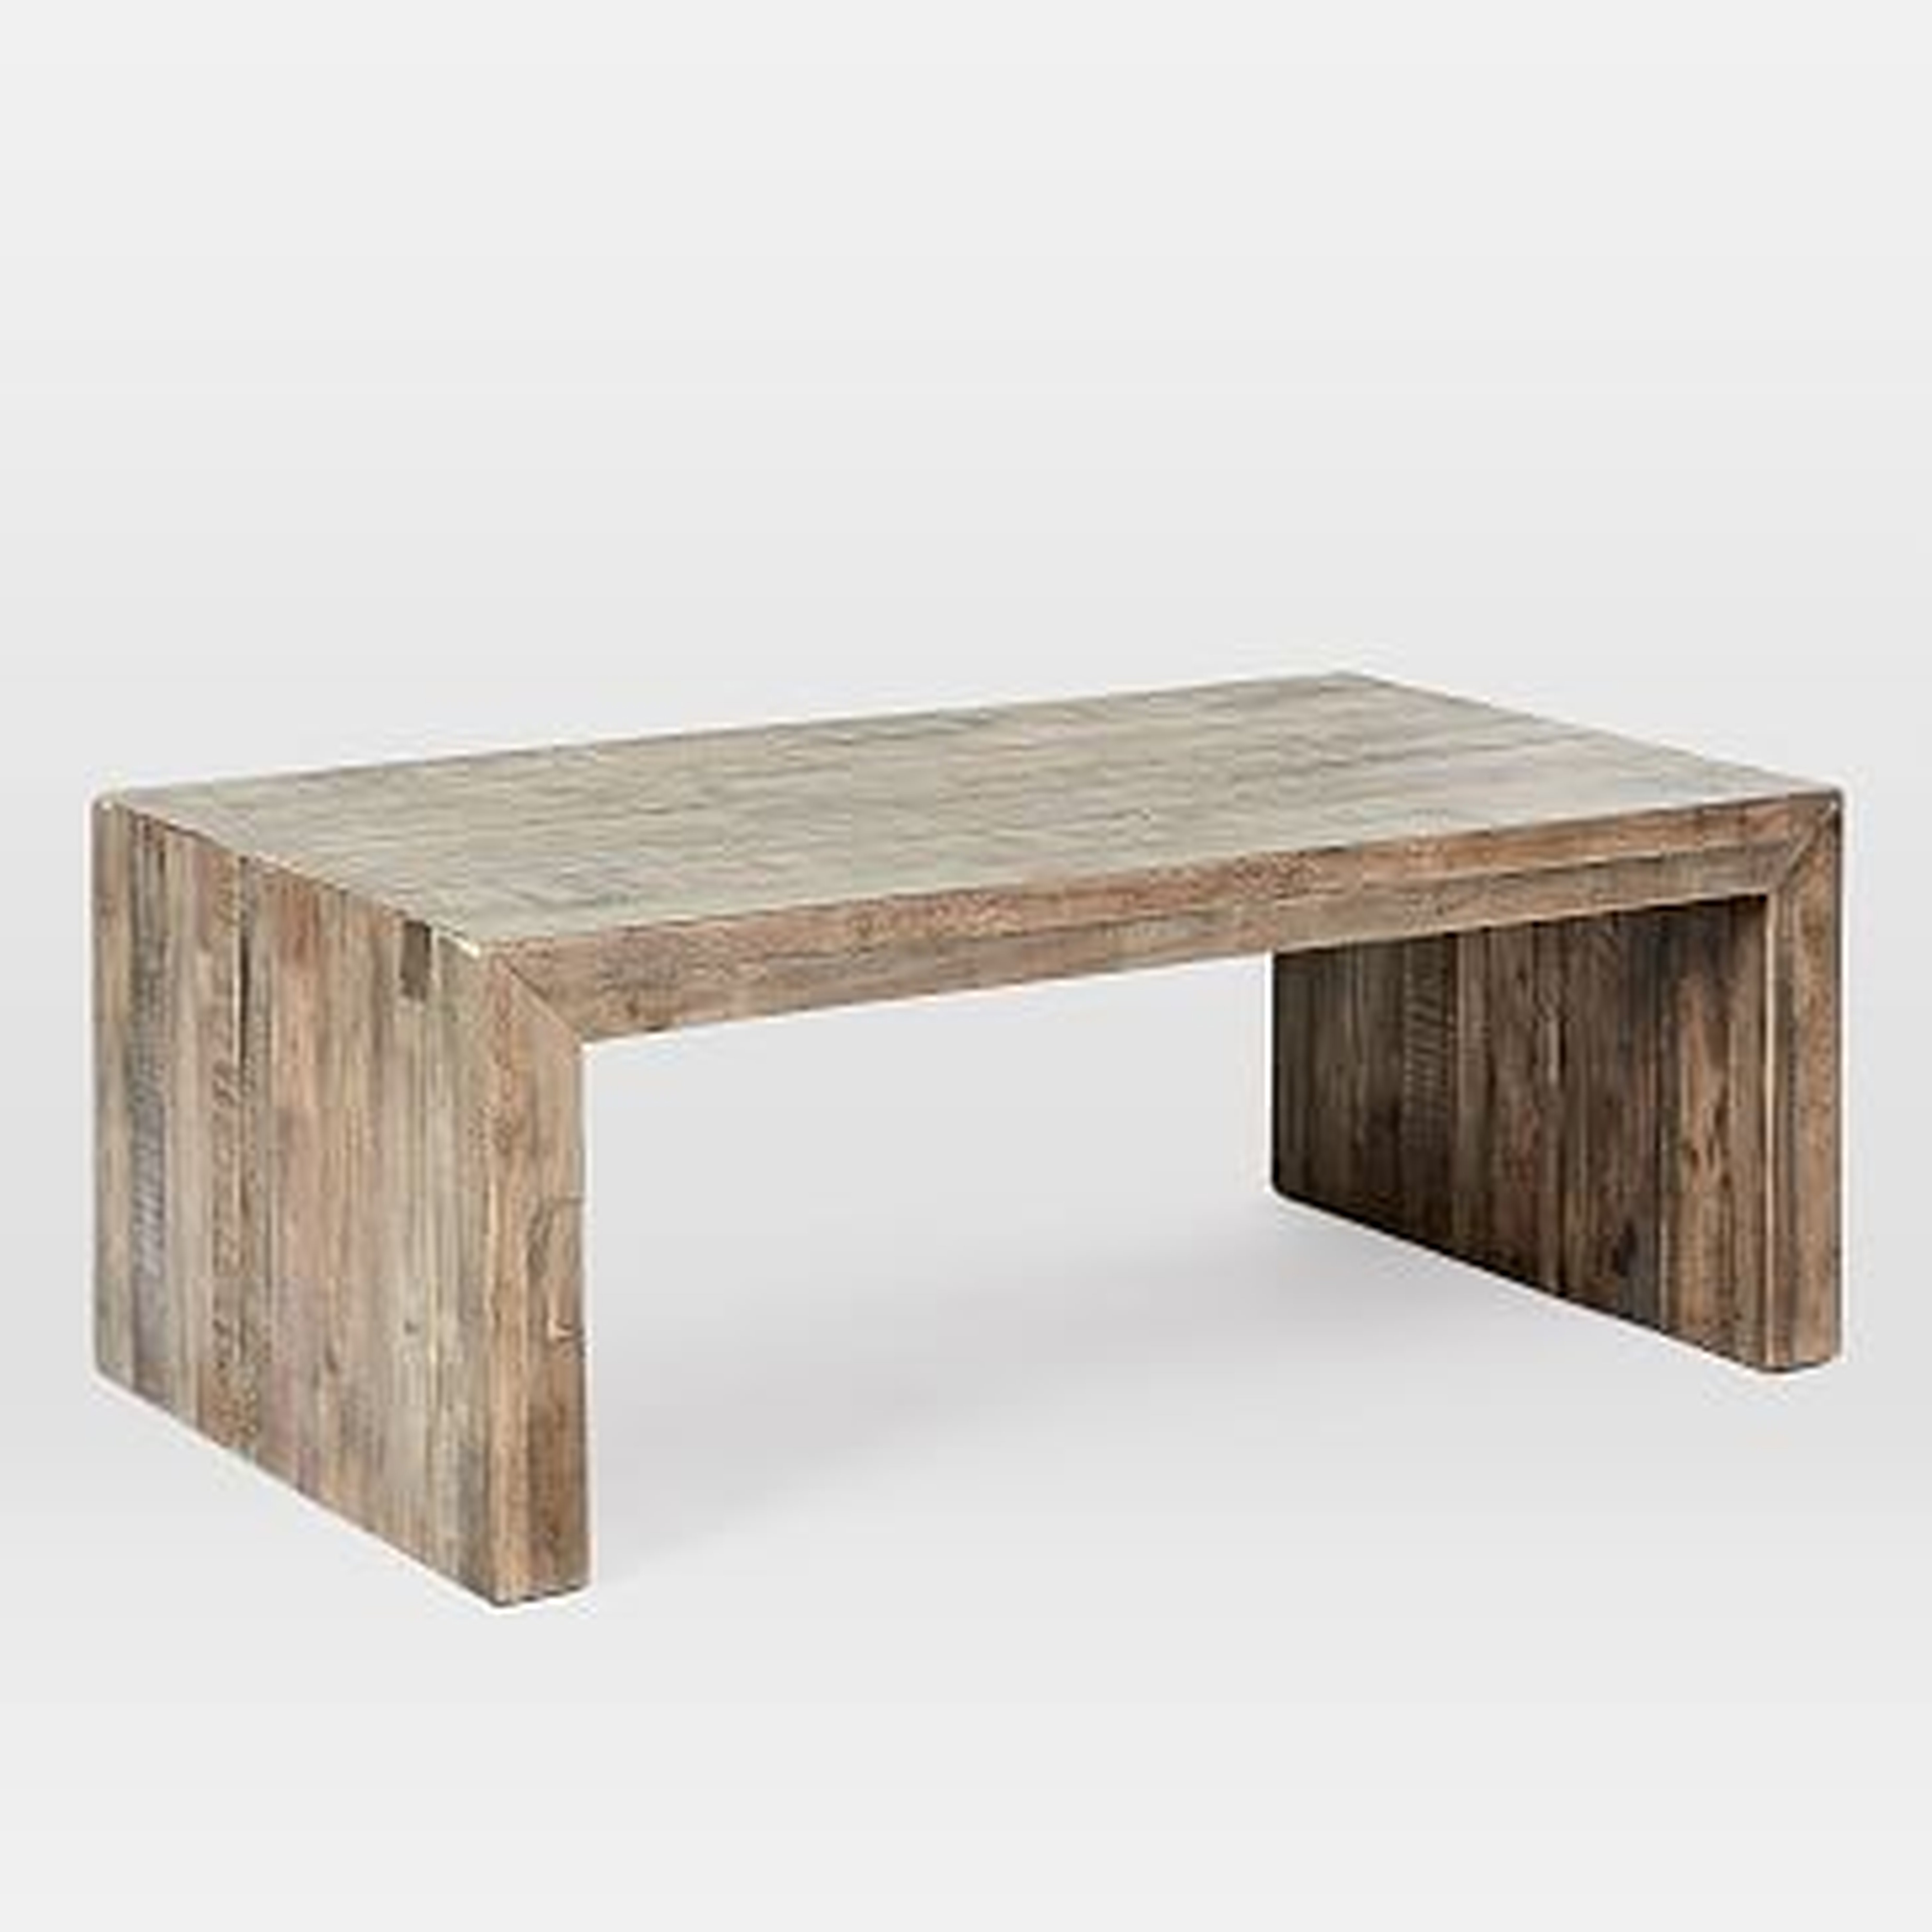 Emmerson® Reclaimed Wood Coffee Table, Stone Gray - West Elm